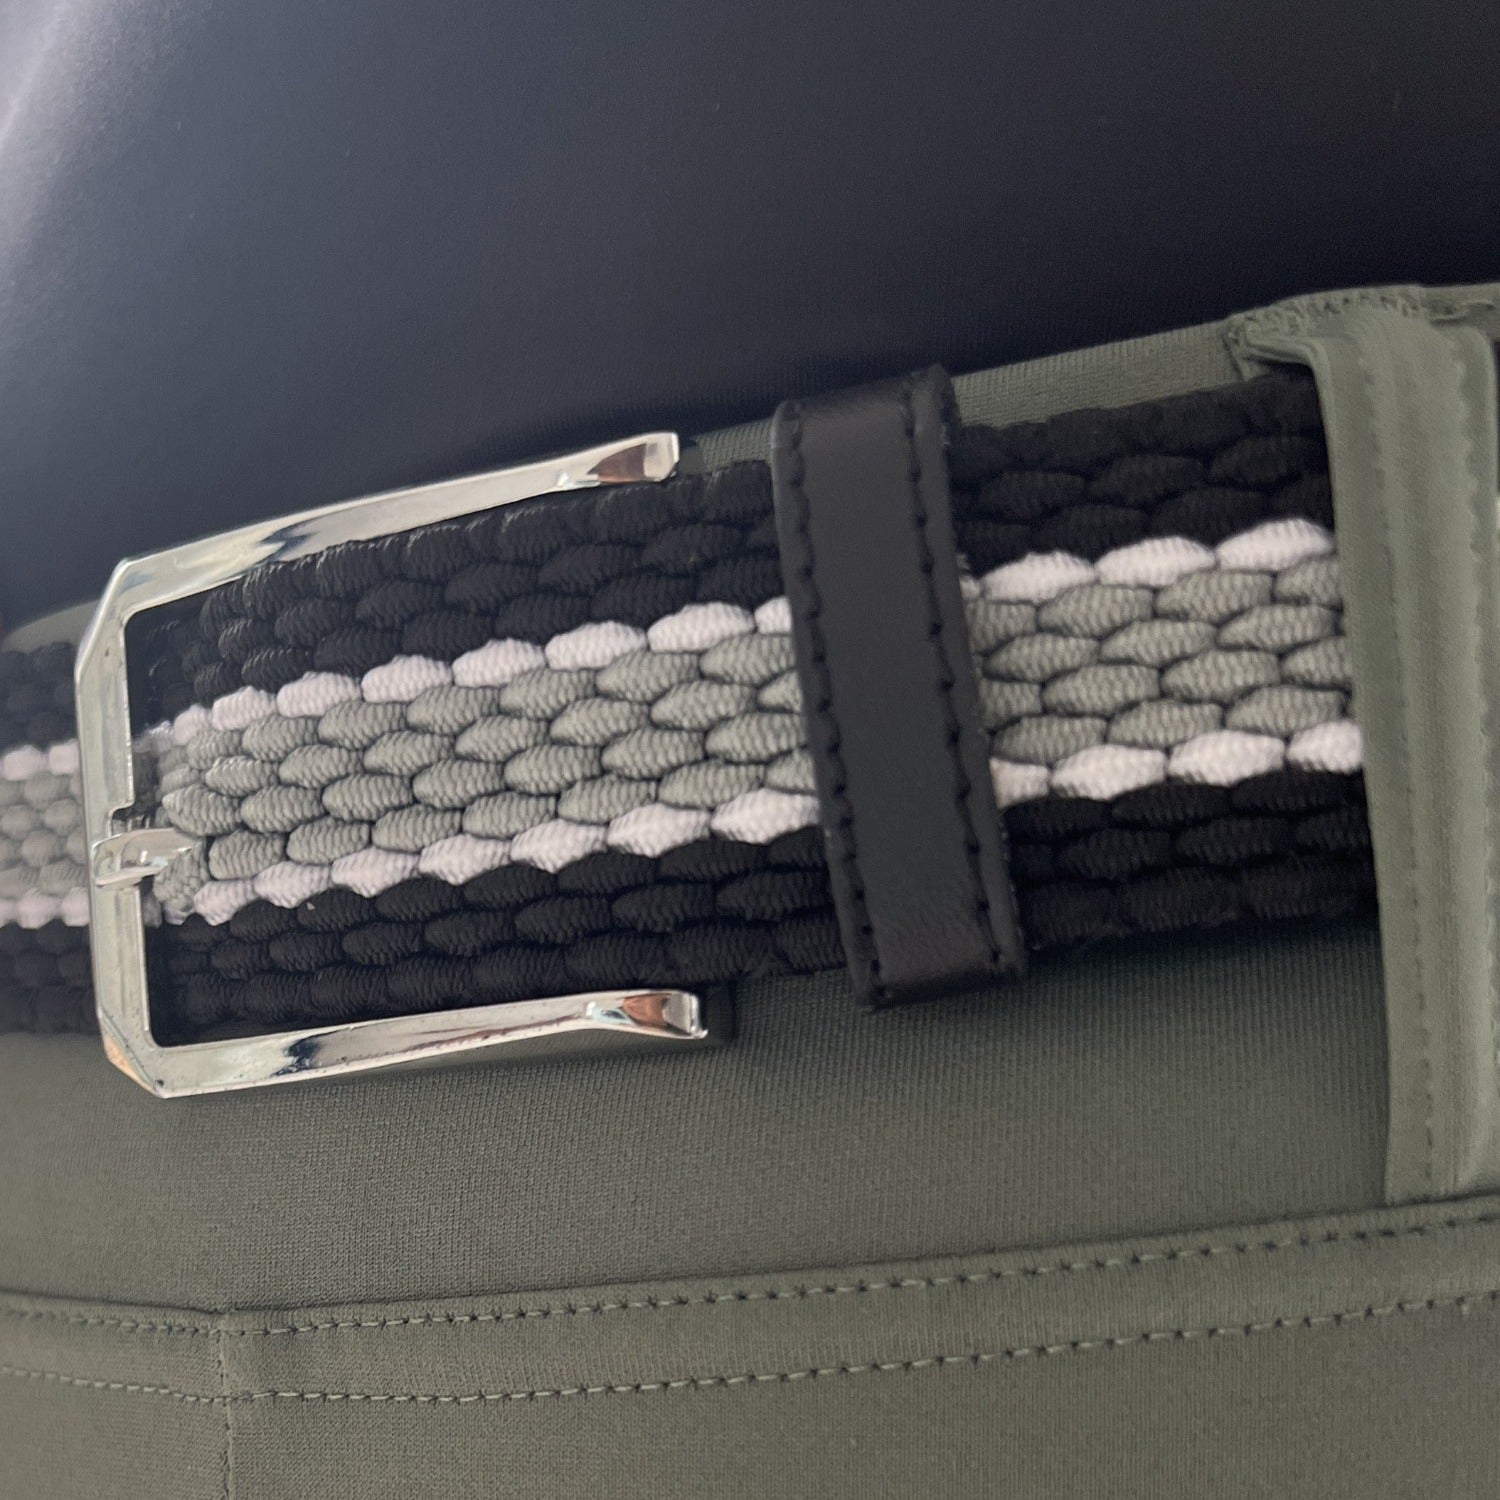 Close-up of Pure Canter's The Braided Belt worn on green pants. The belt features a secure buckle and a pattern consisting of black, gray, and white woven strands with a slight stretch. The metallic silver buckle and black leather loop add a touch of sophistication.